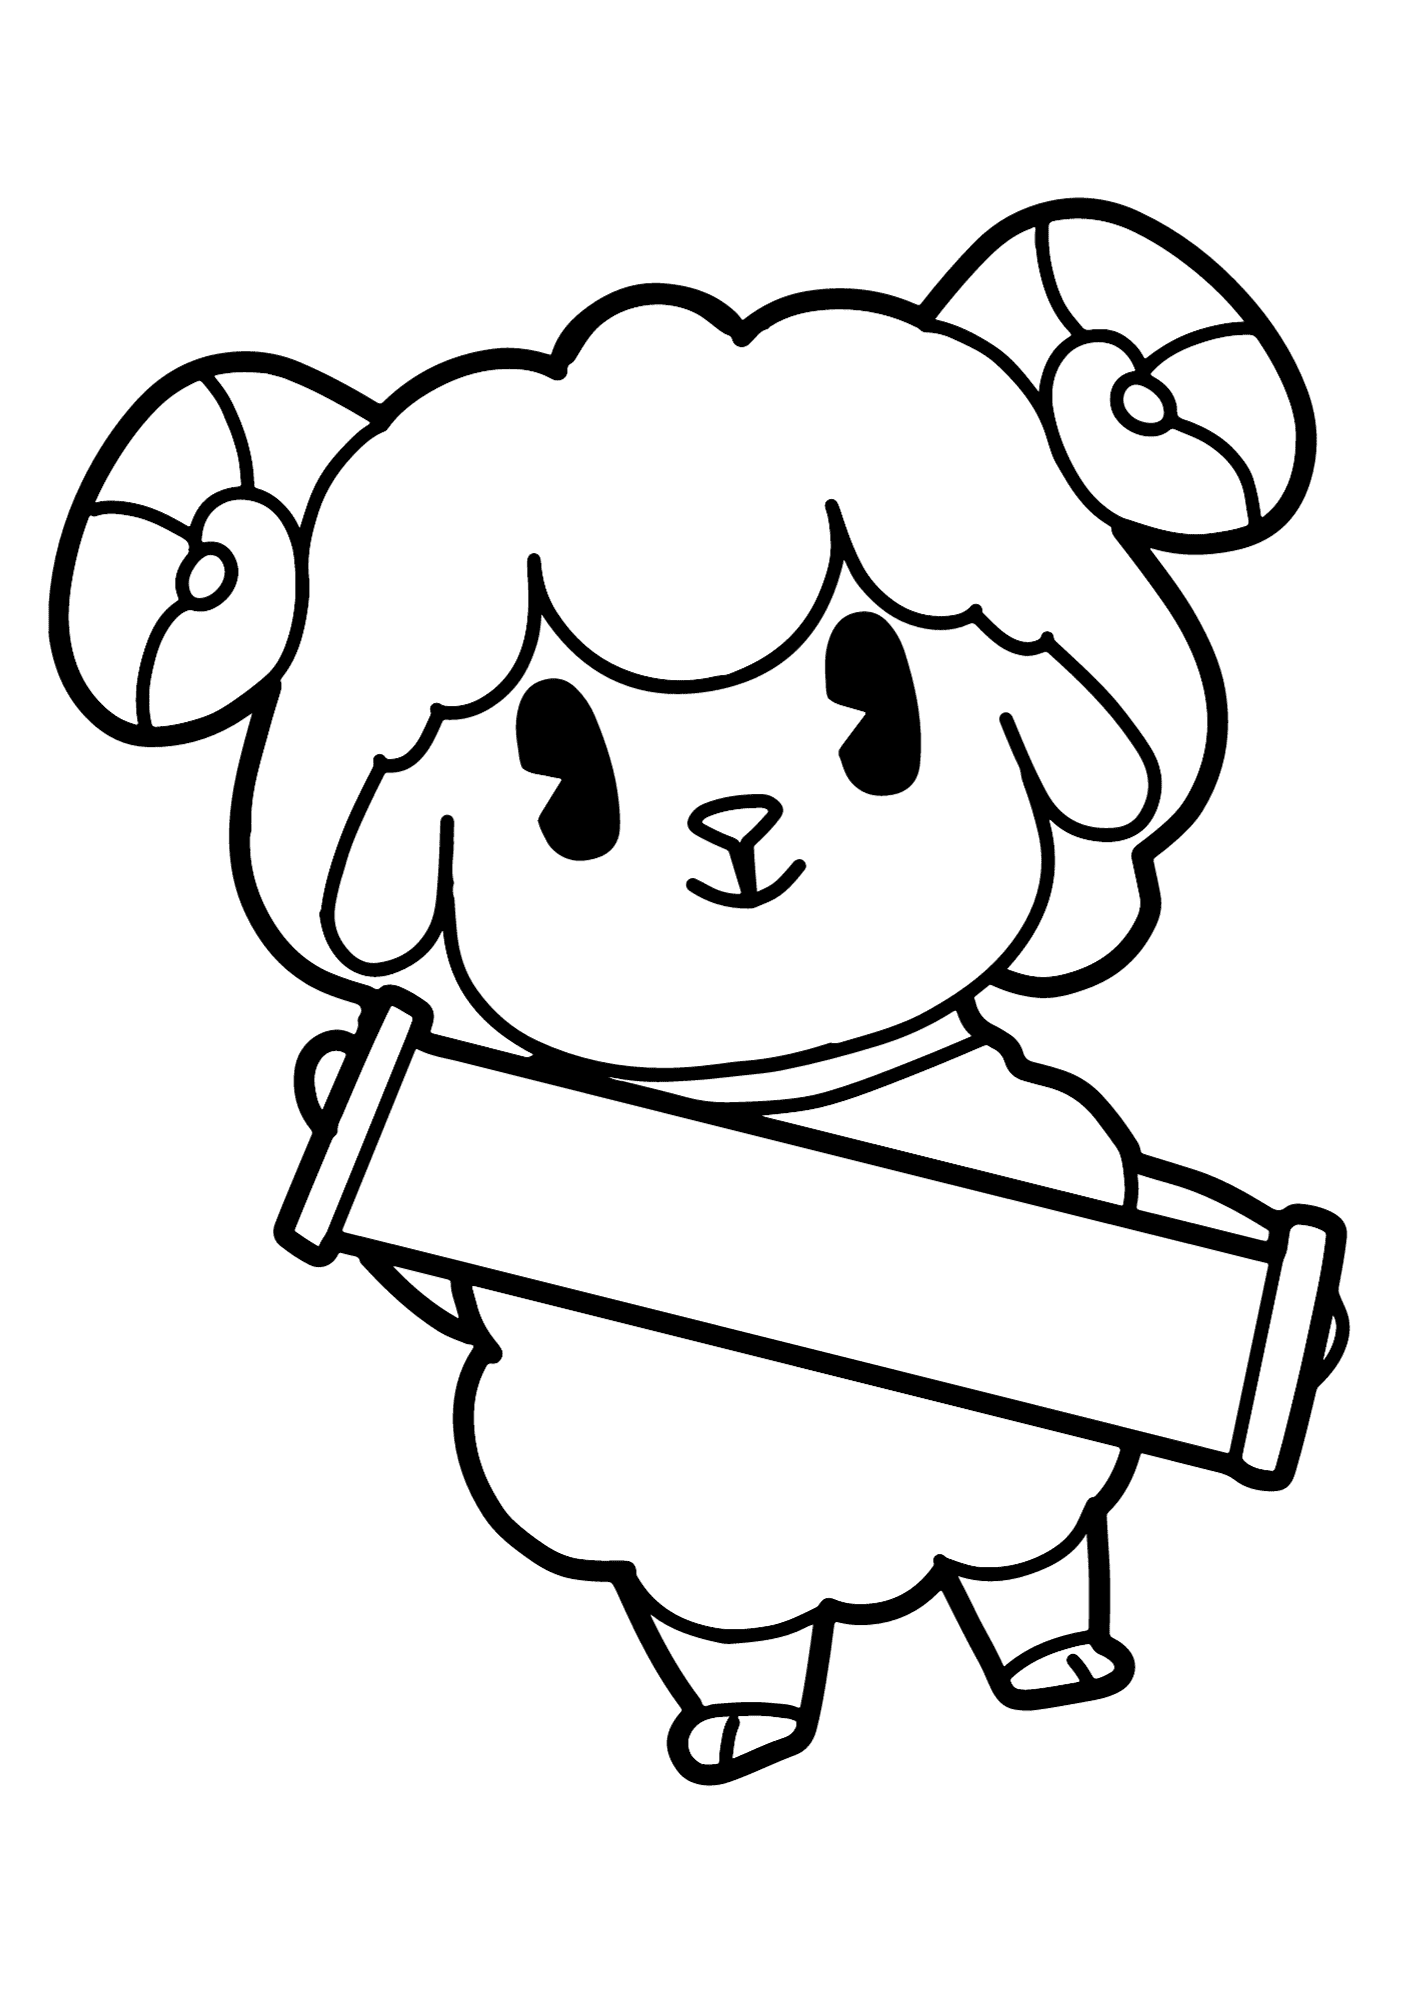 Lovely Sheep Coloring Pages